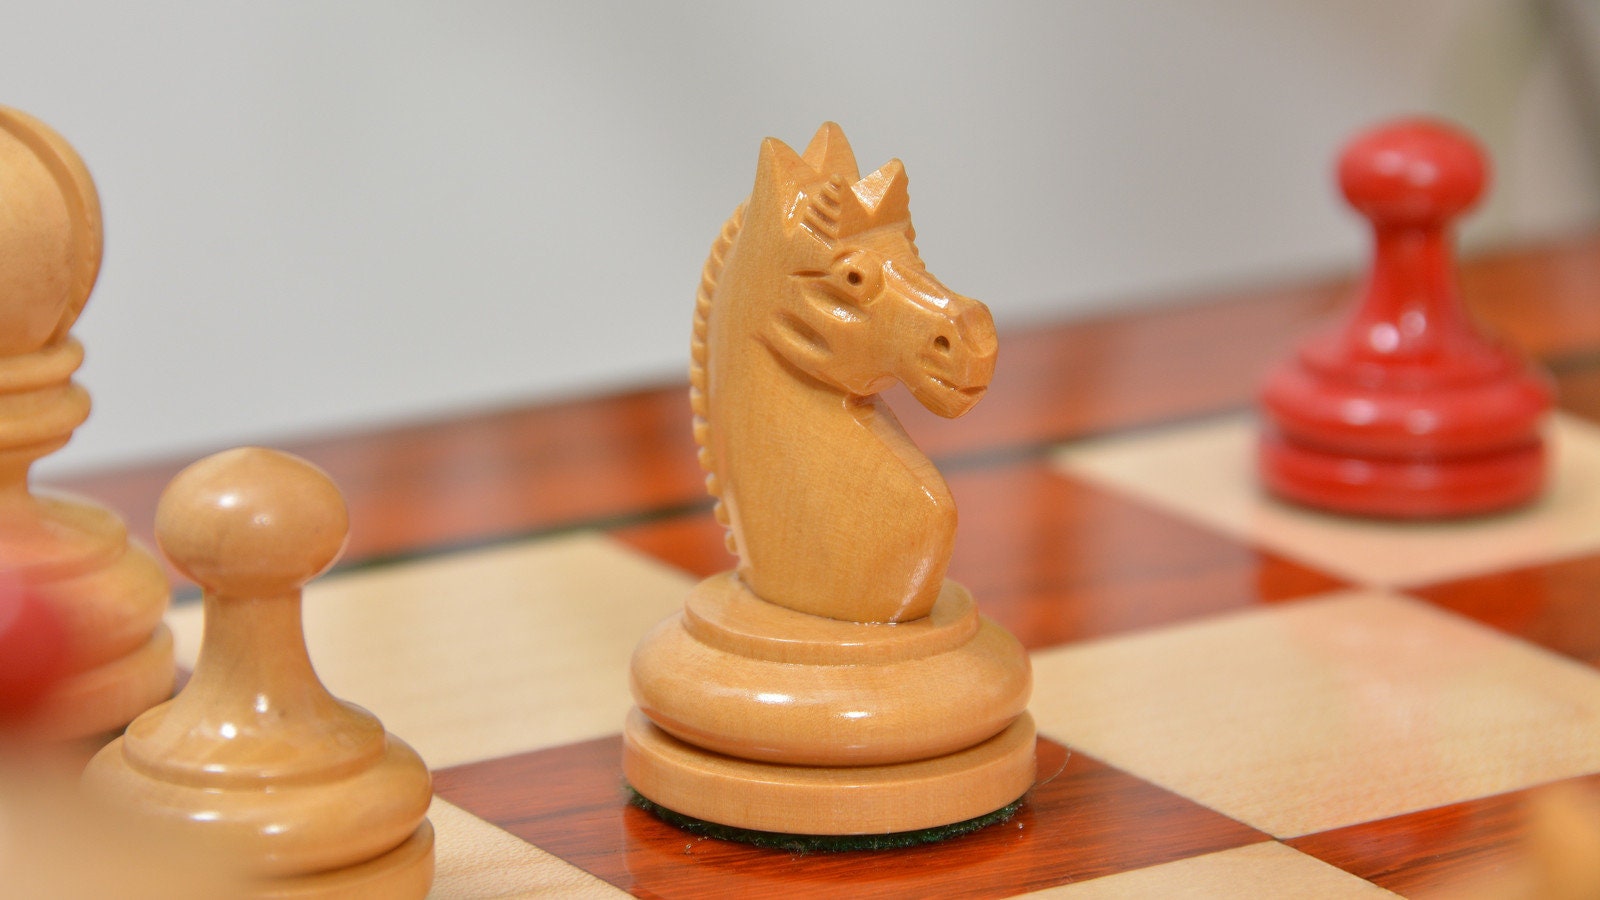 Combo of Reproduced Vintage 1930 German Knubbel Analysis Chess Pieces in  Stained Crimson and Boxwood - 2.91 King with Wooden Chess Board